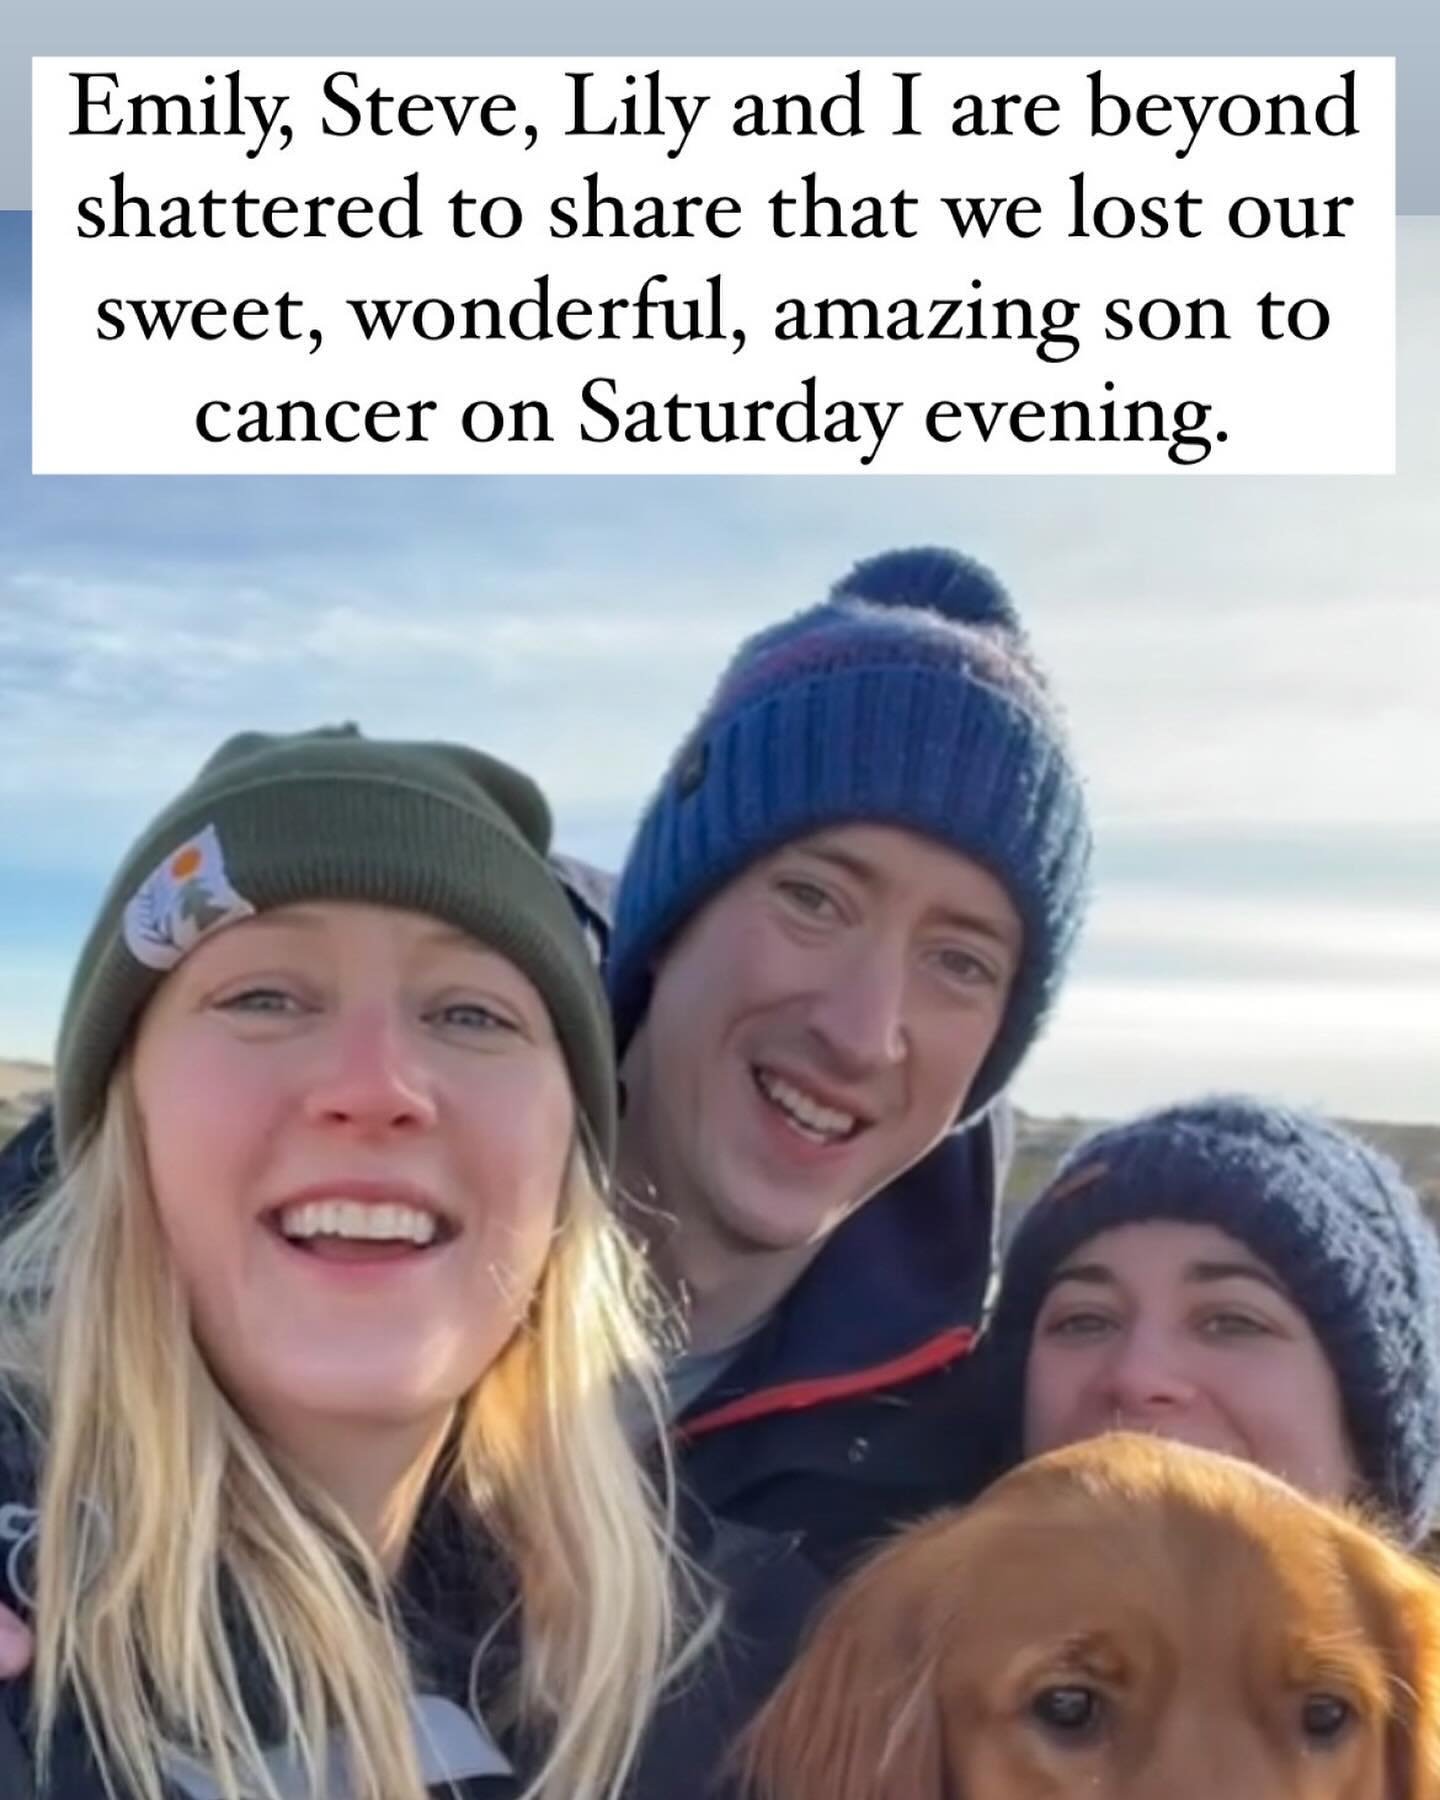 Emily, Steve, Lily and I are beyond shattered to share that we lost our sweet, wonderful, amazing son to cancer on Saturday.
 
https://www.dignitymemorial.com/obituaries/new-york-ny/robert-carpenter-11759665